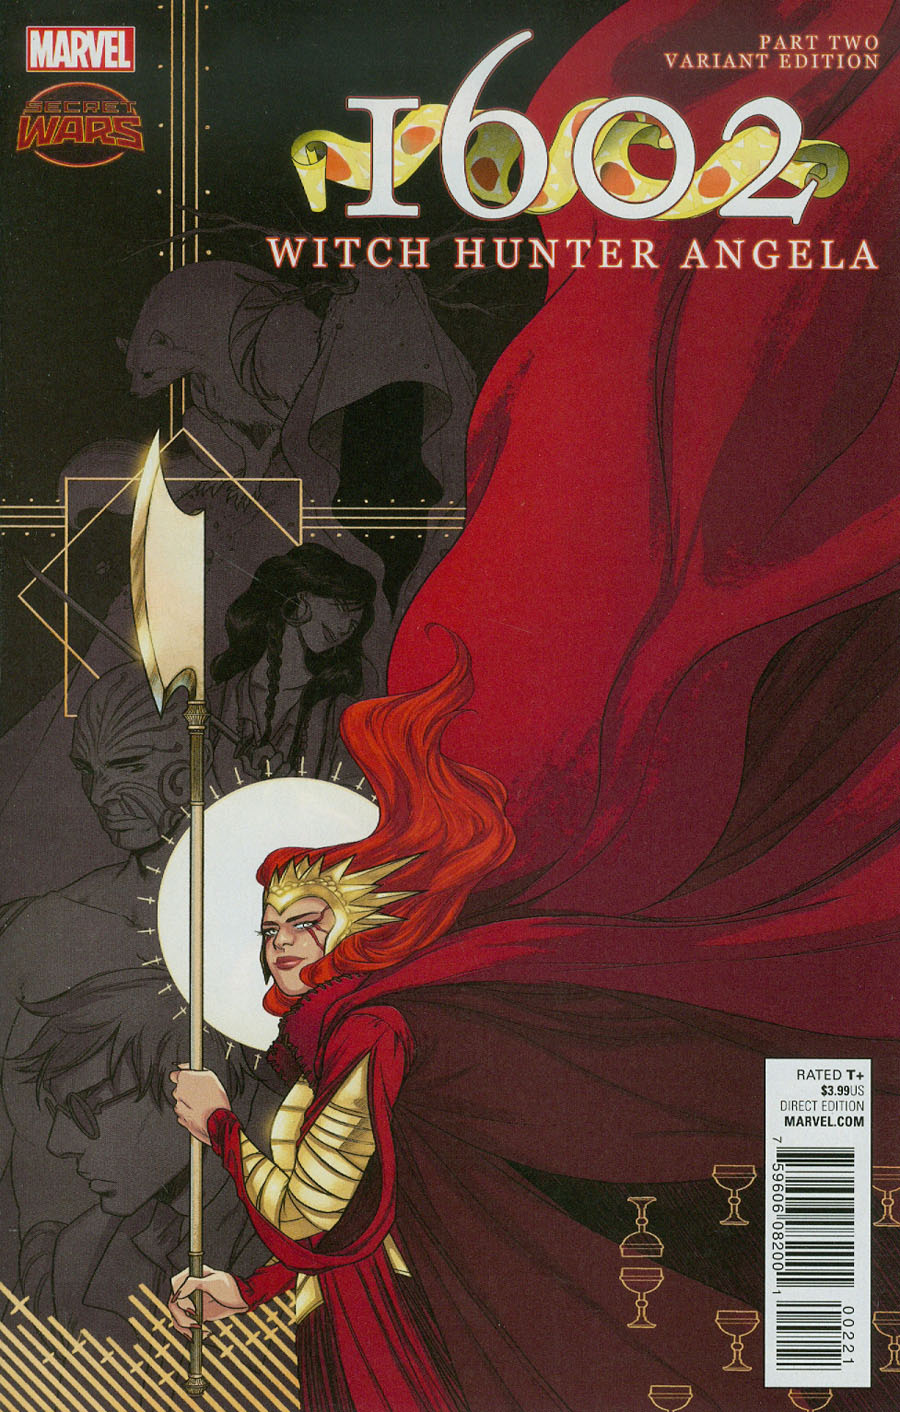 1602 Witch Hunter Angela #2 Cover B Incentive Irene Koh Variant Cover (Secret Wars Warzones Tie-In)